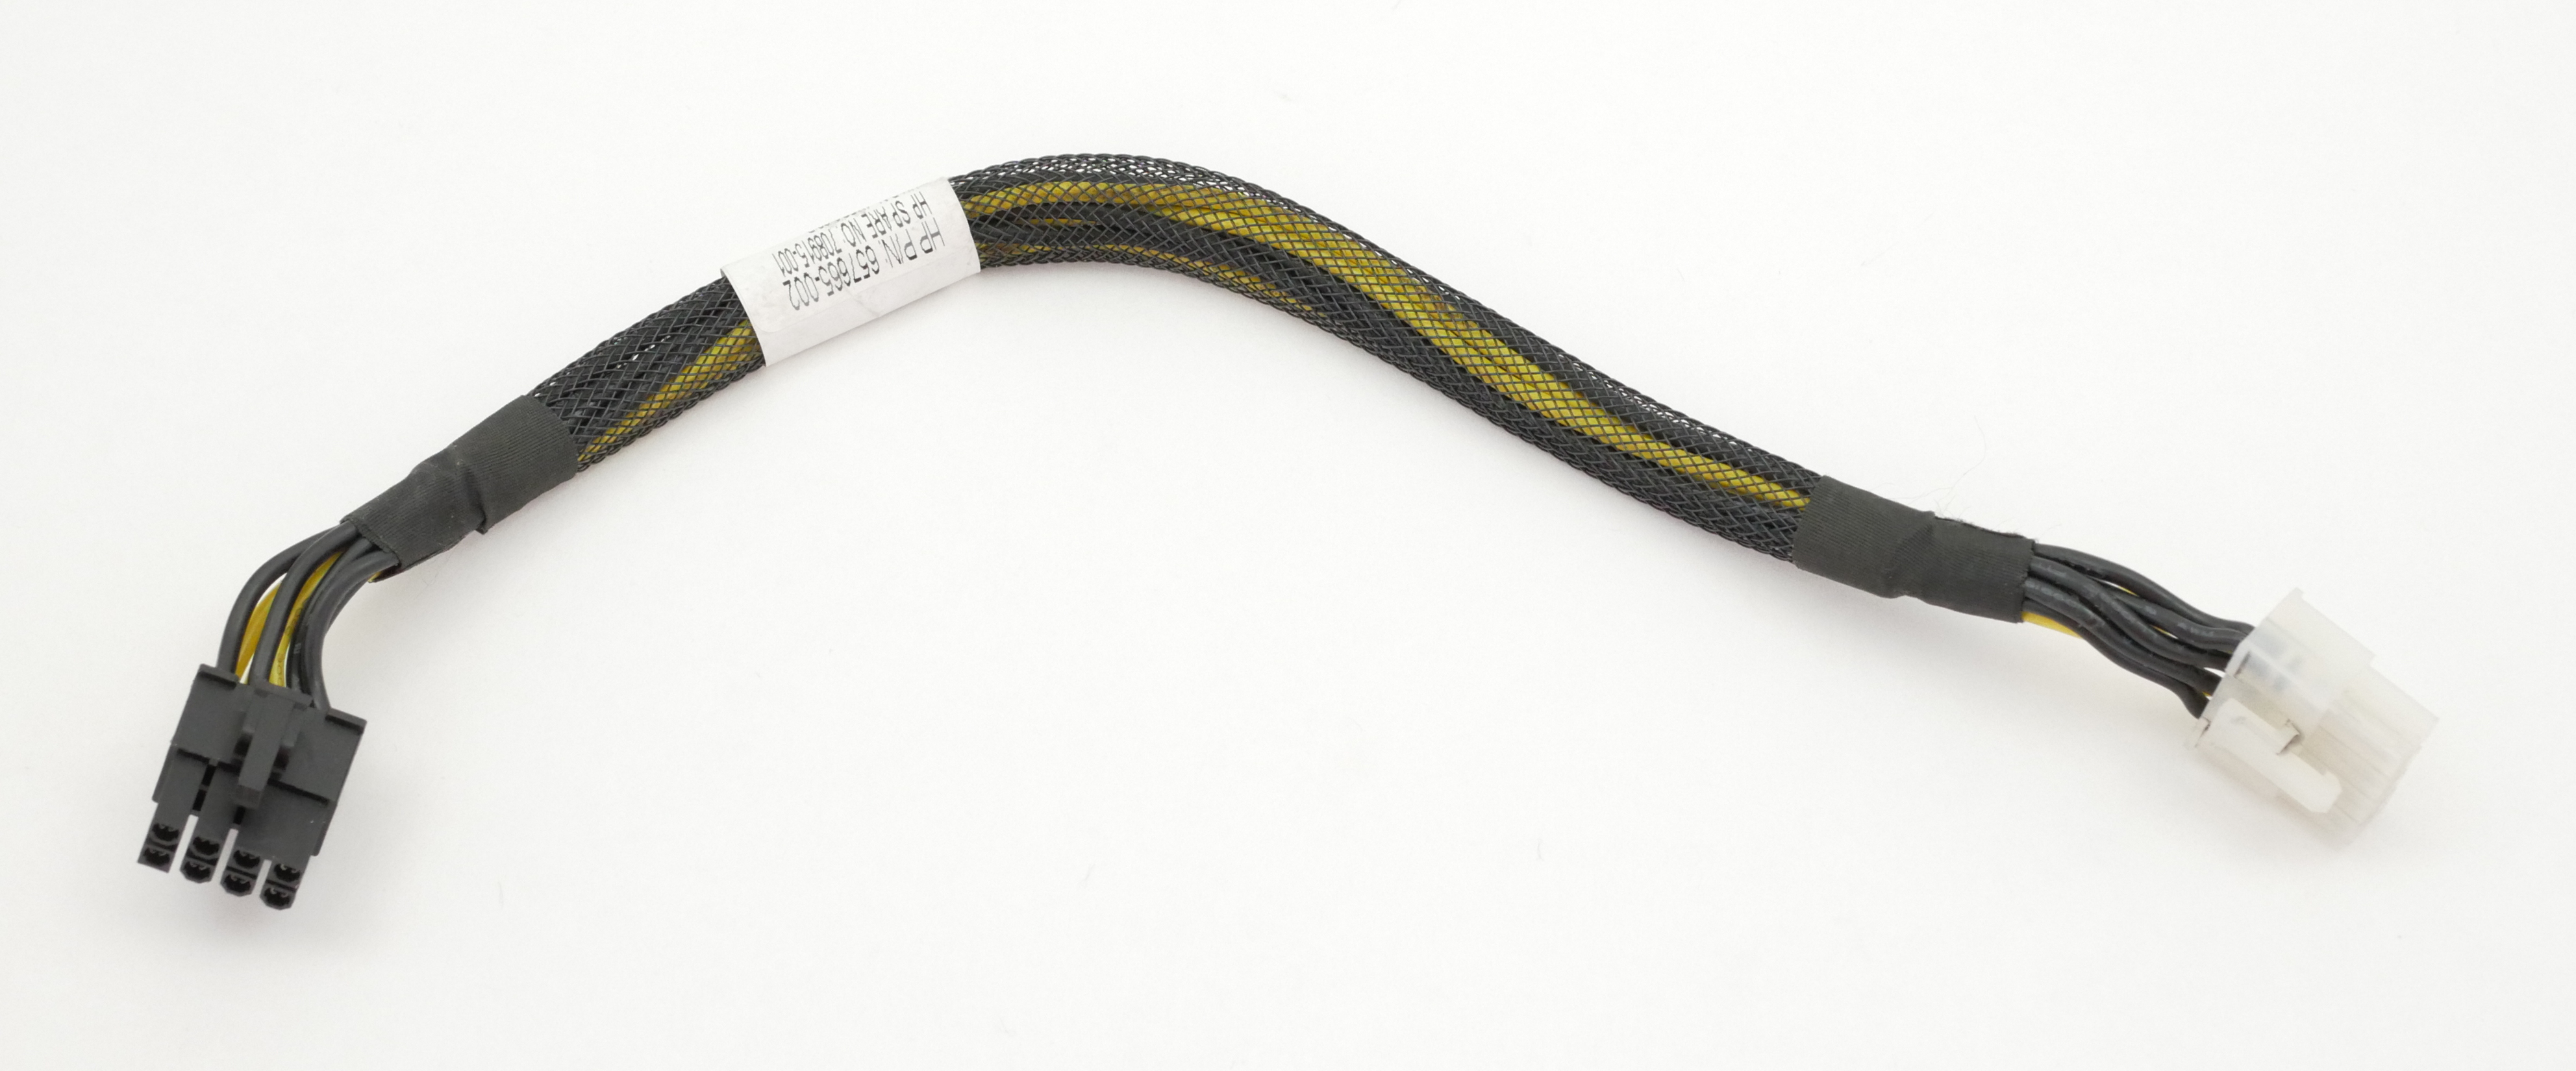 HP GPU Power Cable for SL250 G8 11" 8pin to 8pin 657665-002 708915-001 - Click Image to Close